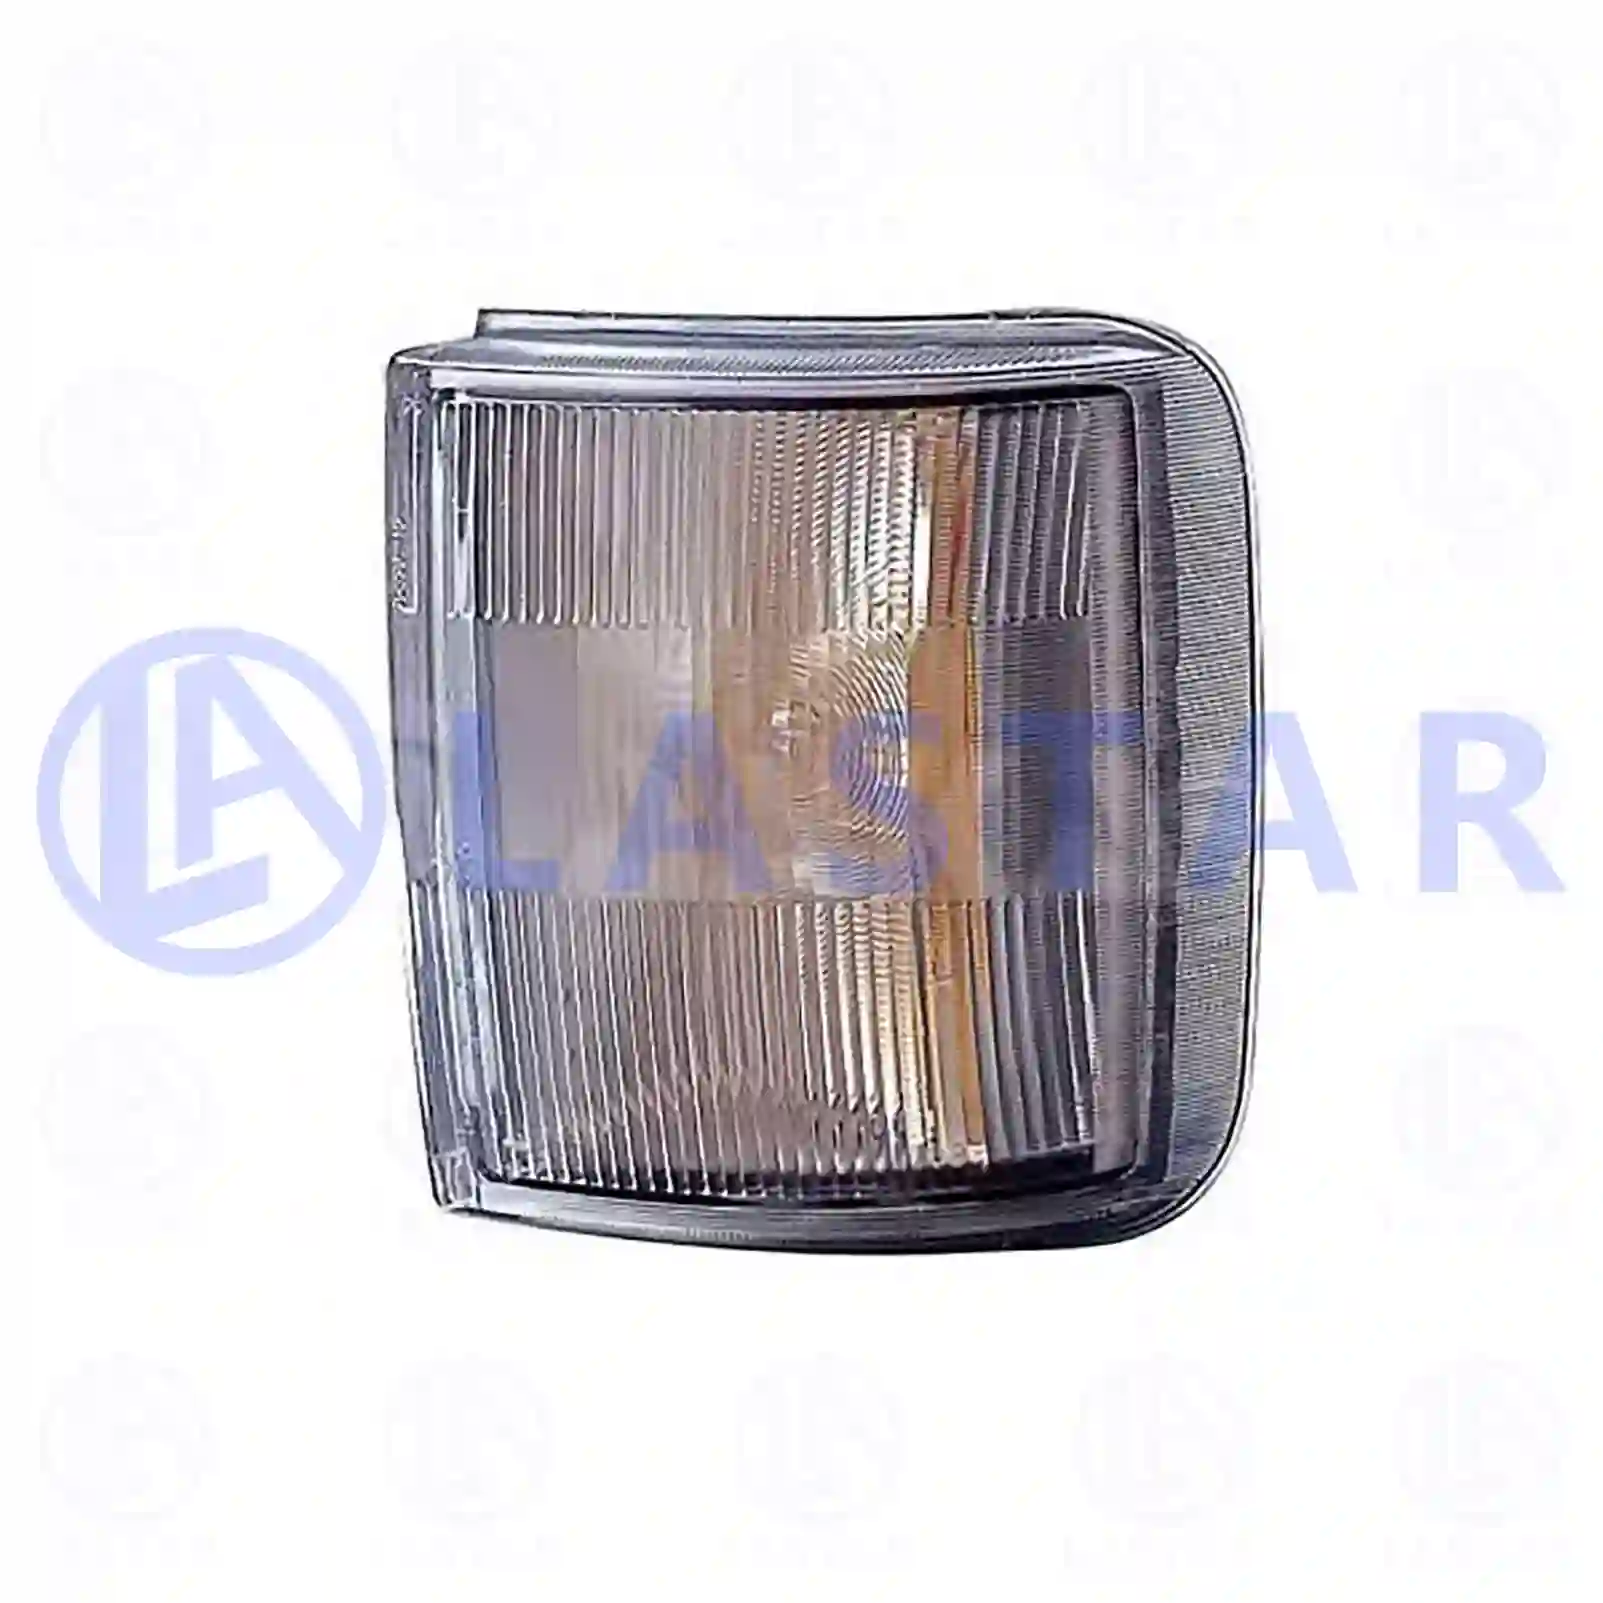 Turn signal lamp, right, without bulb, 77712382, 98460036, ZG21237-0008 ||  77712382 Lastar Spare Part | Truck Spare Parts, Auotomotive Spare Parts Turn signal lamp, right, without bulb, 77712382, 98460036, ZG21237-0008 ||  77712382 Lastar Spare Part | Truck Spare Parts, Auotomotive Spare Parts